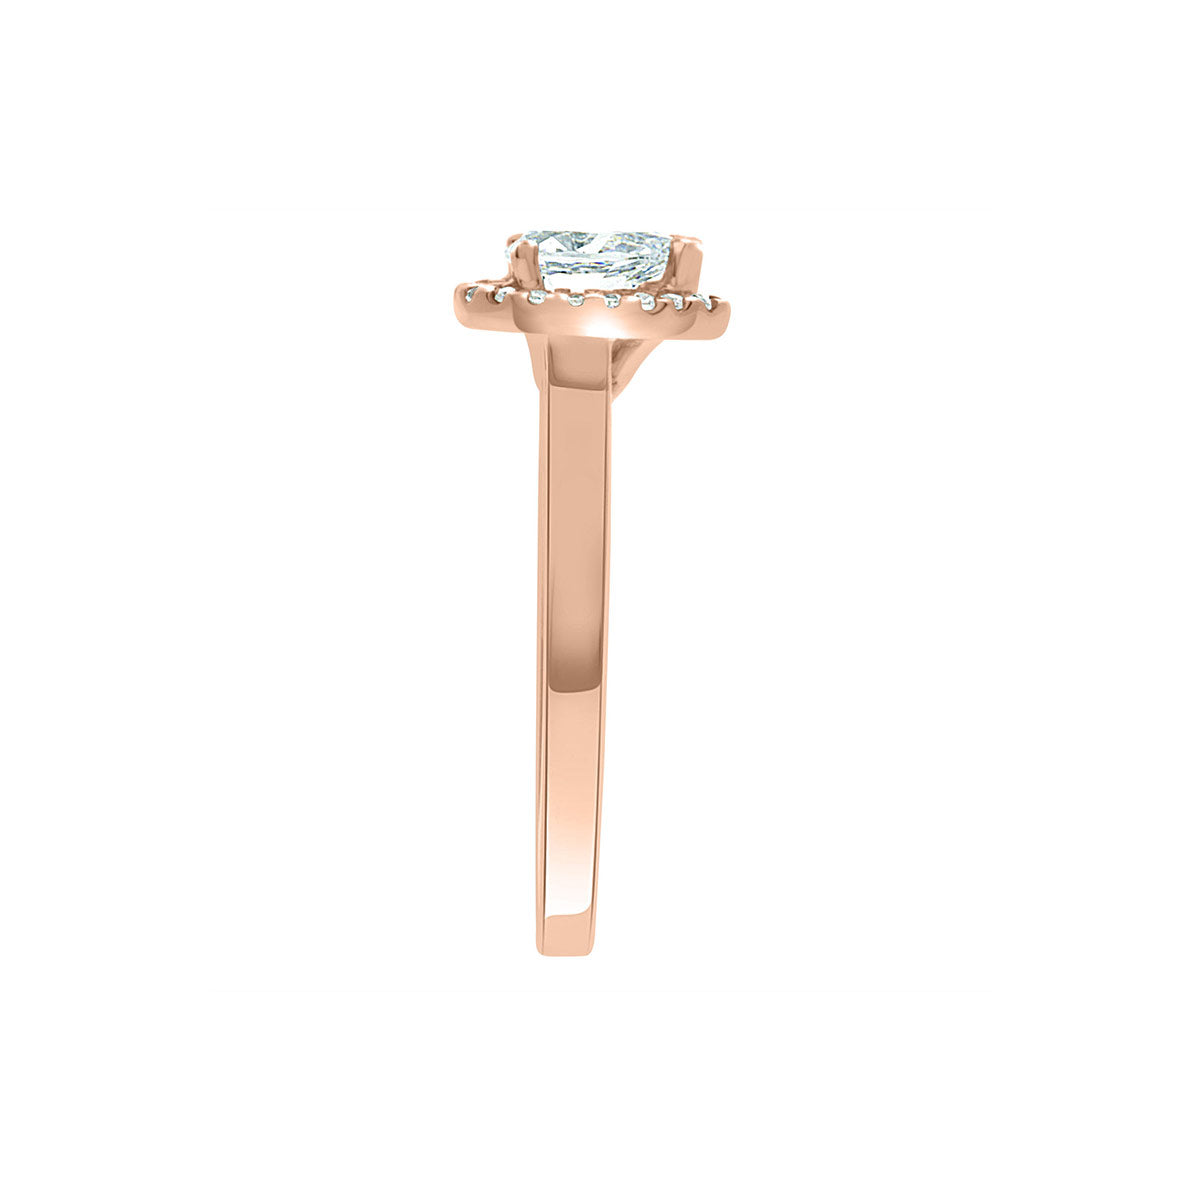 Vintage Engagement Ring with Pear Shape Diamond in rose gold, shown from the side